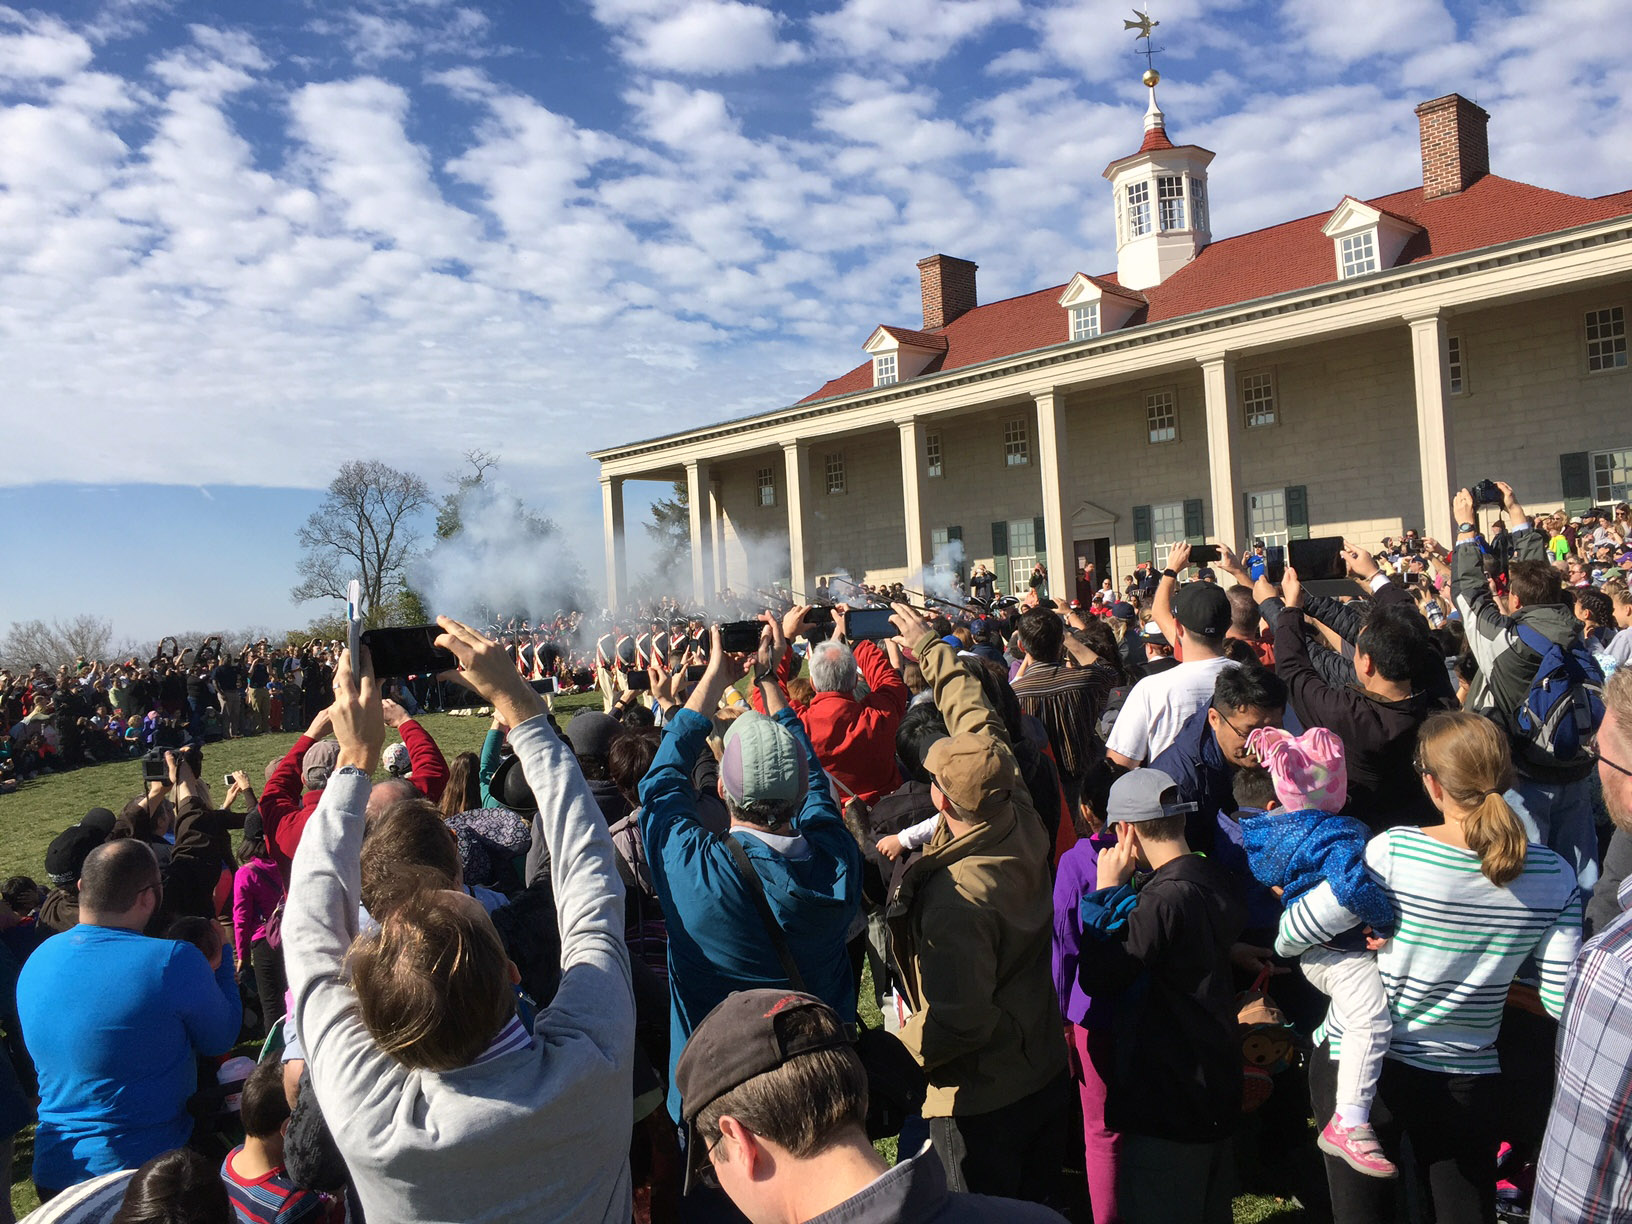 A 21-gun salute honors the birthday of the first U.S. president, George Washington, at Mount Vernon on Monday, Feb. 20, 2017. (WTOP/Rich Johnson)